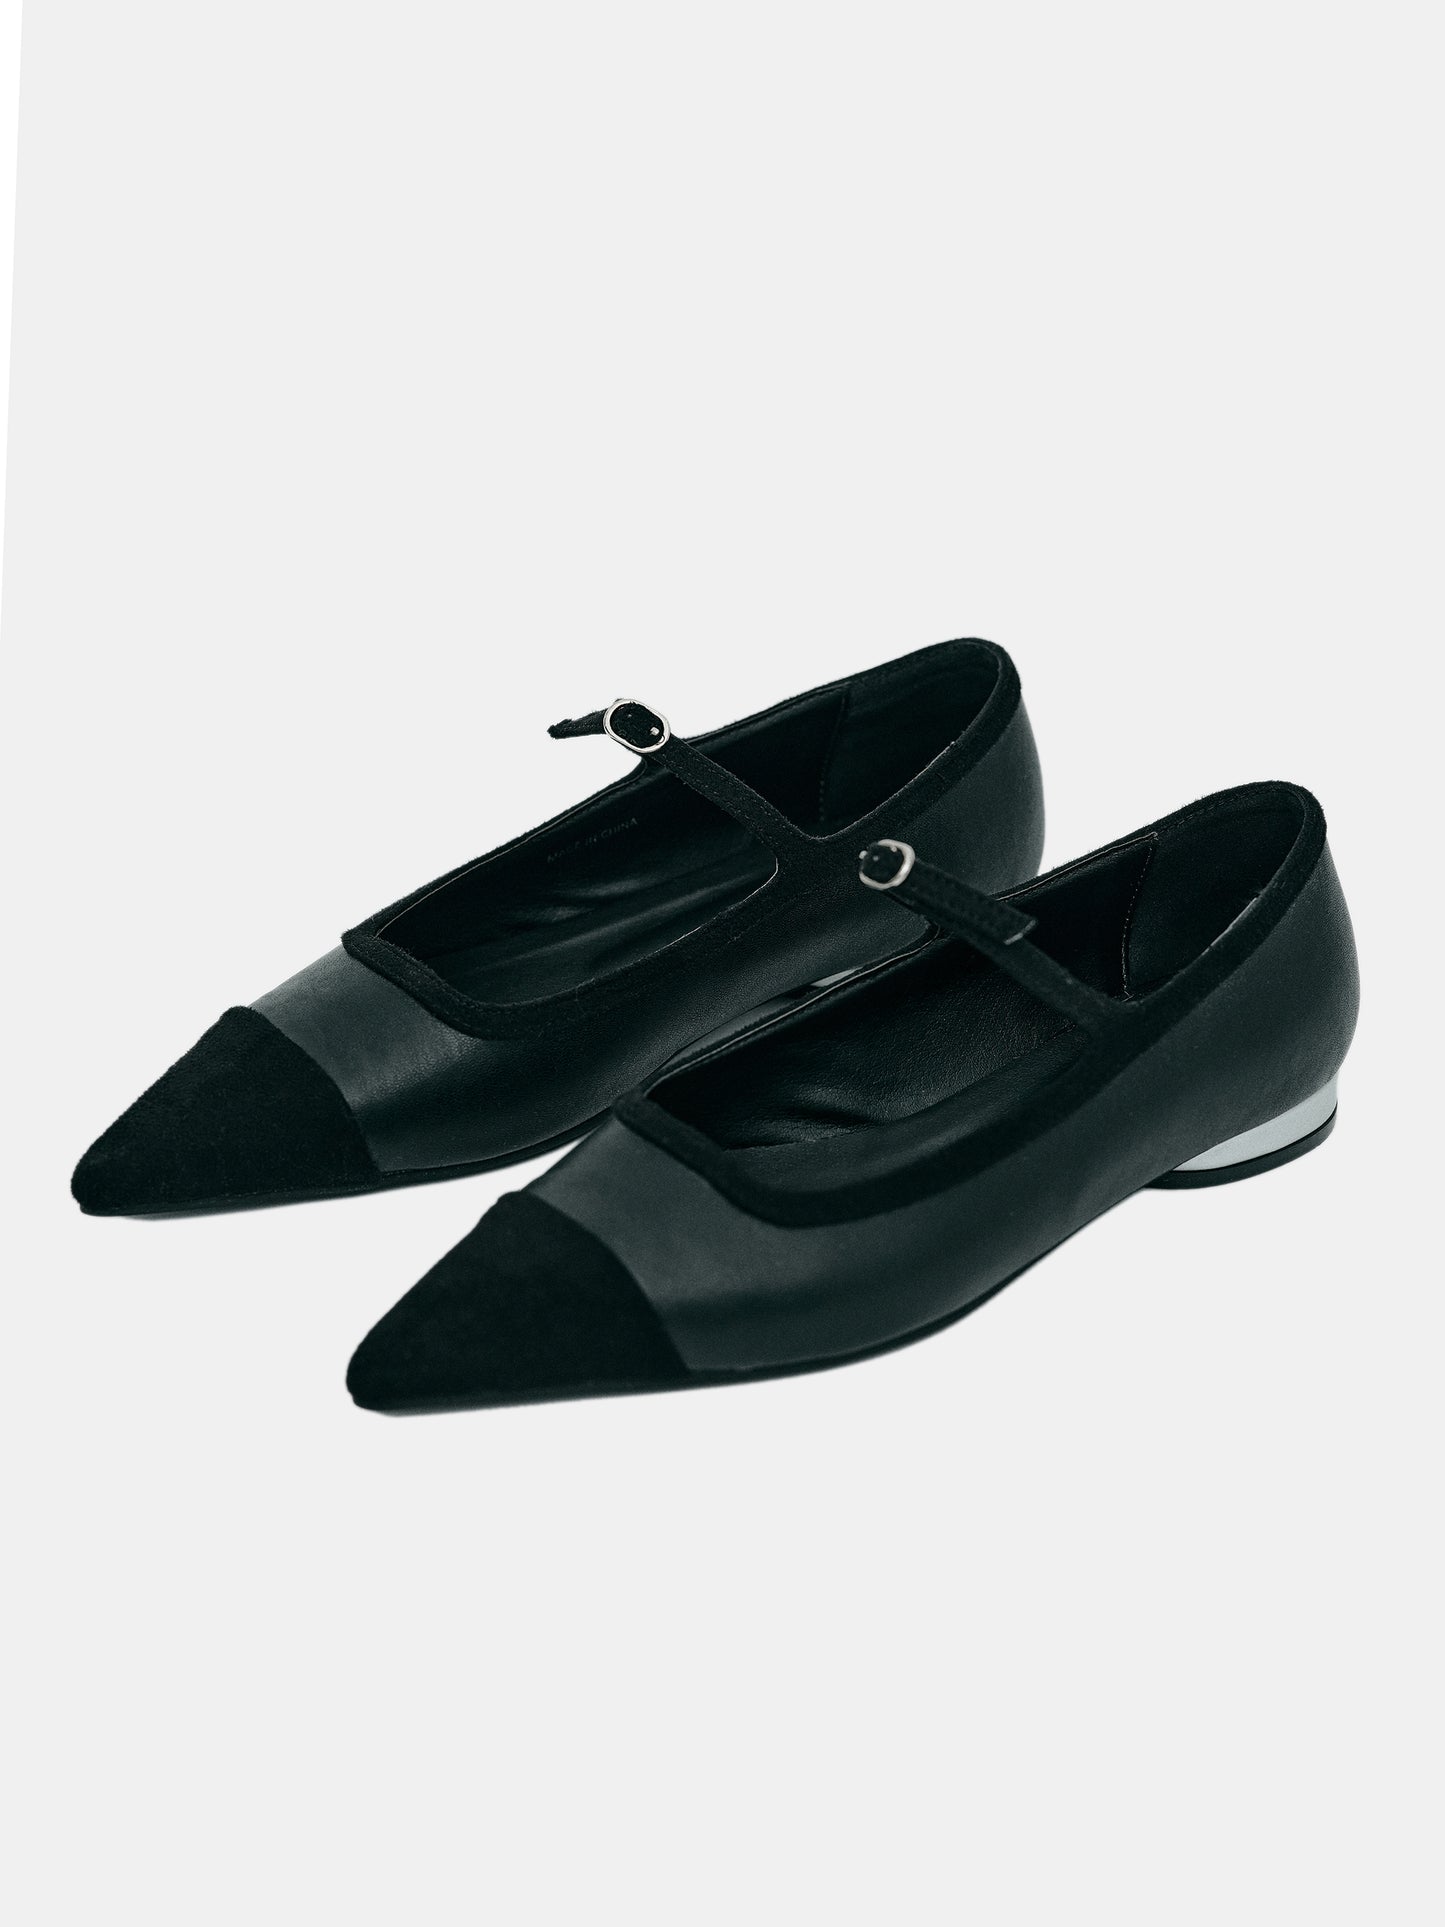 Pointed Toe Ballet Flats, Black